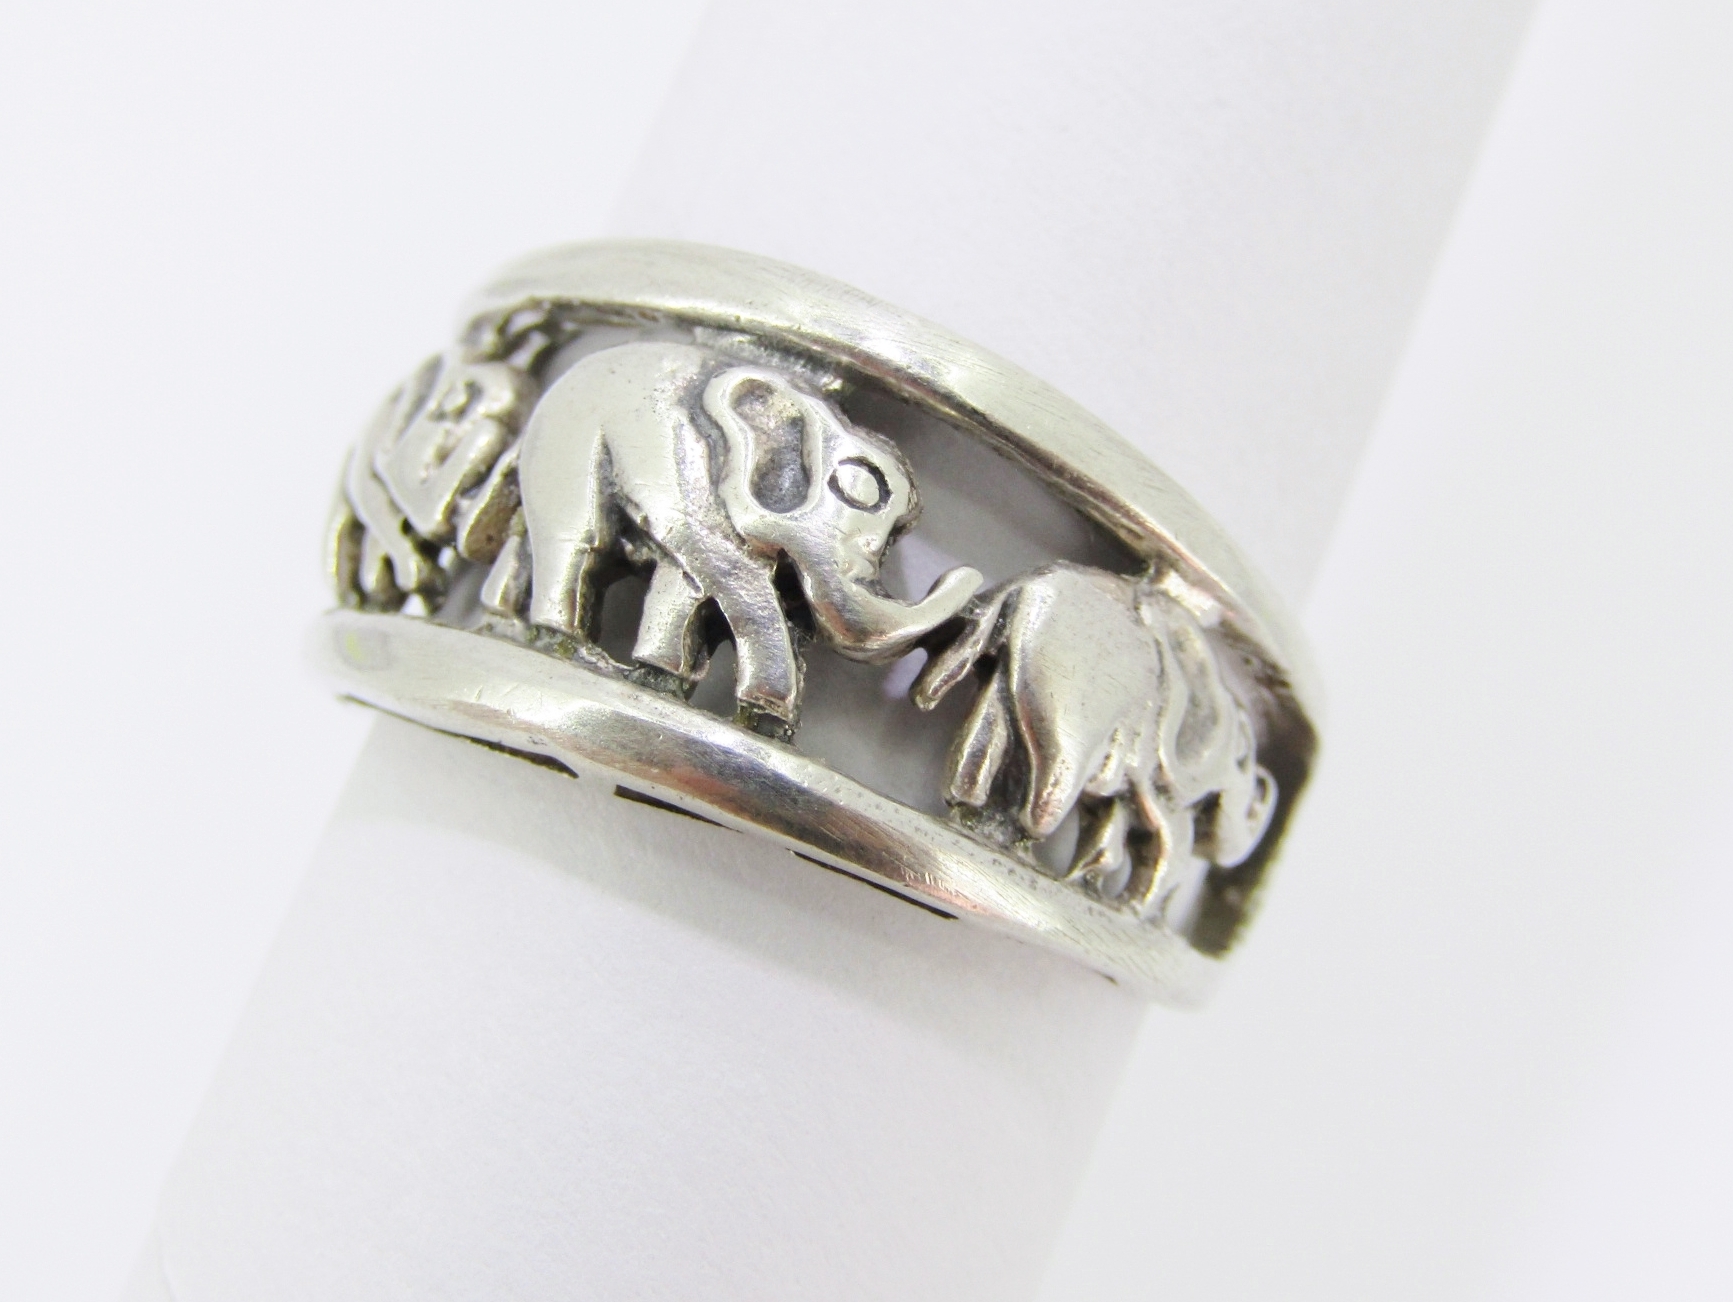 Stunning Elephant Design Band in Sterling Silver.